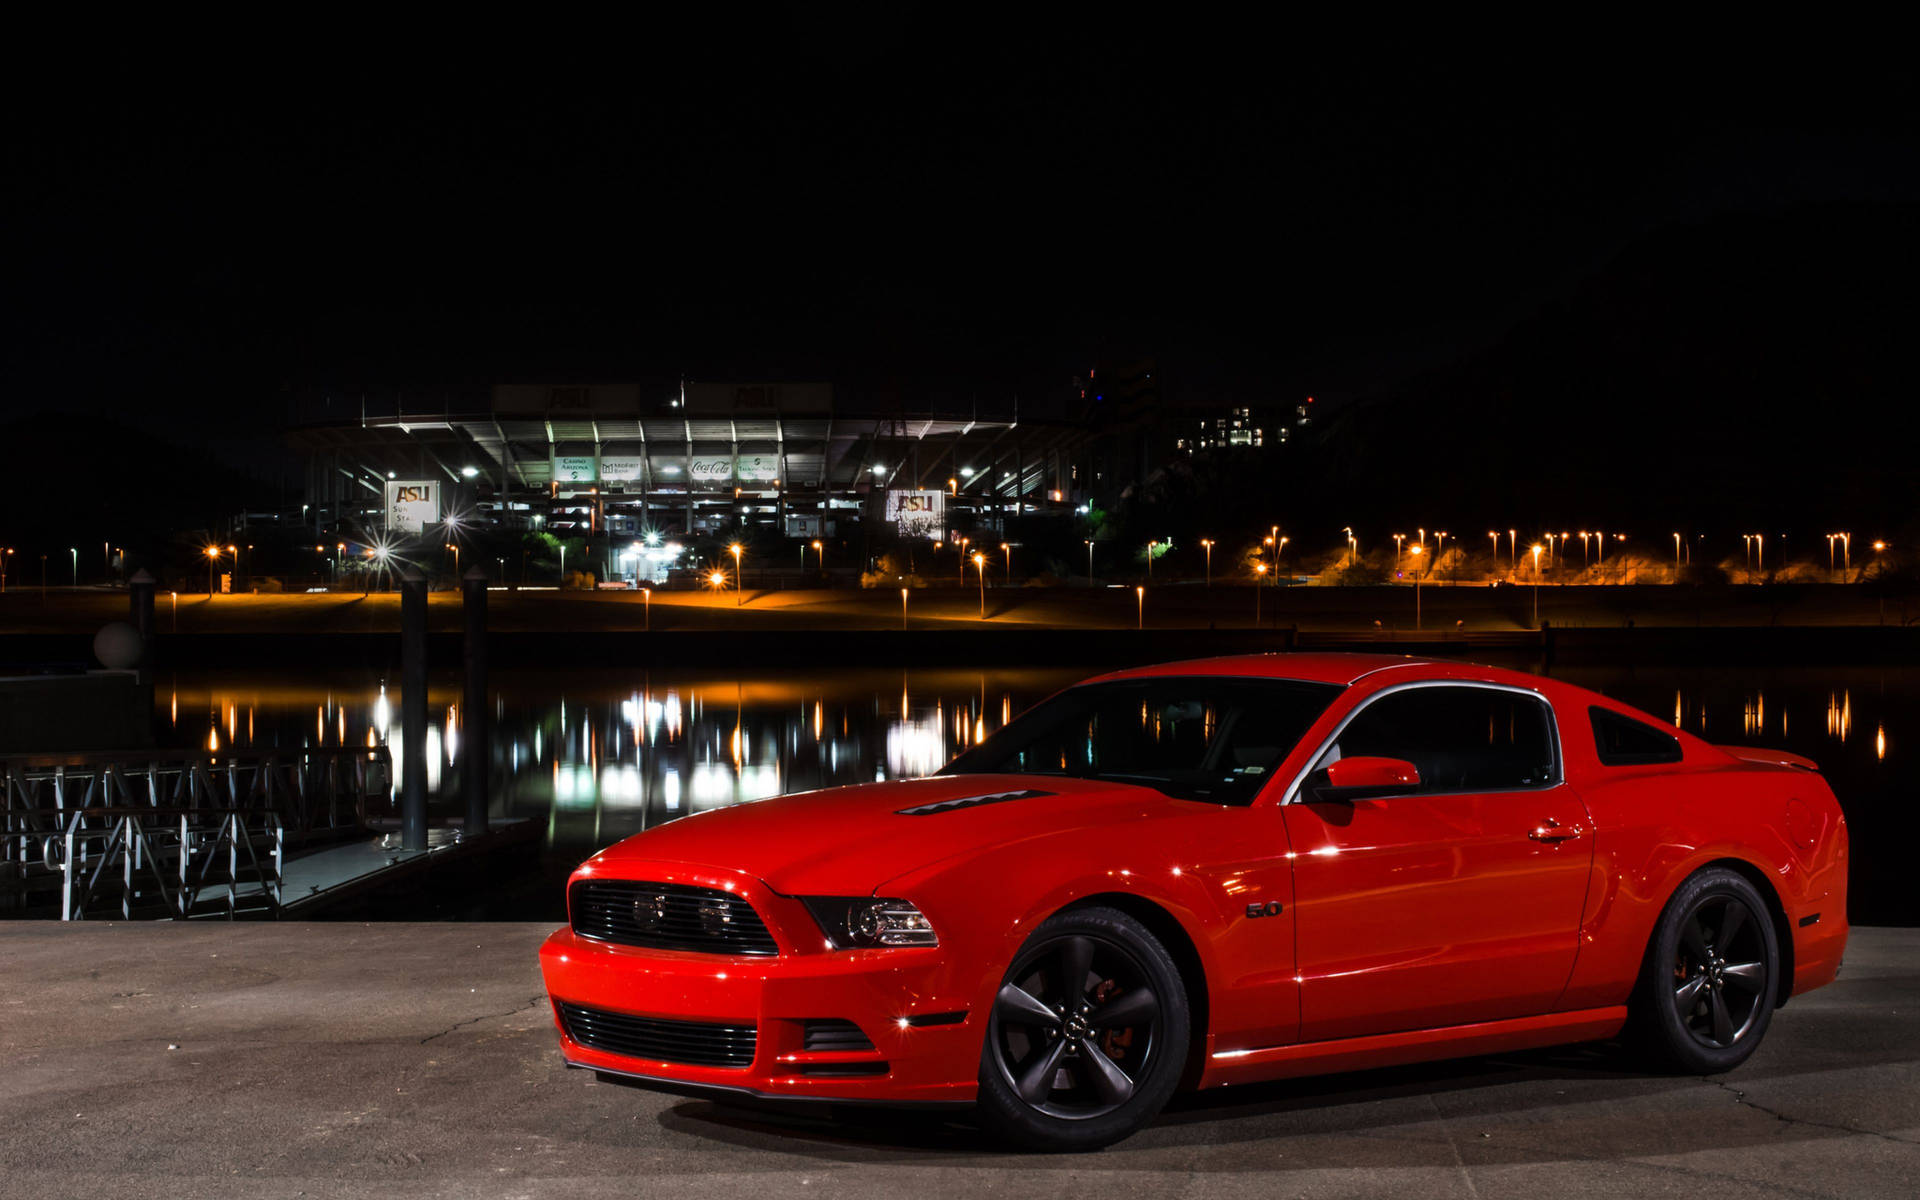 Captivating View of Mustang GT in 4K Ultra HD Wallpaper